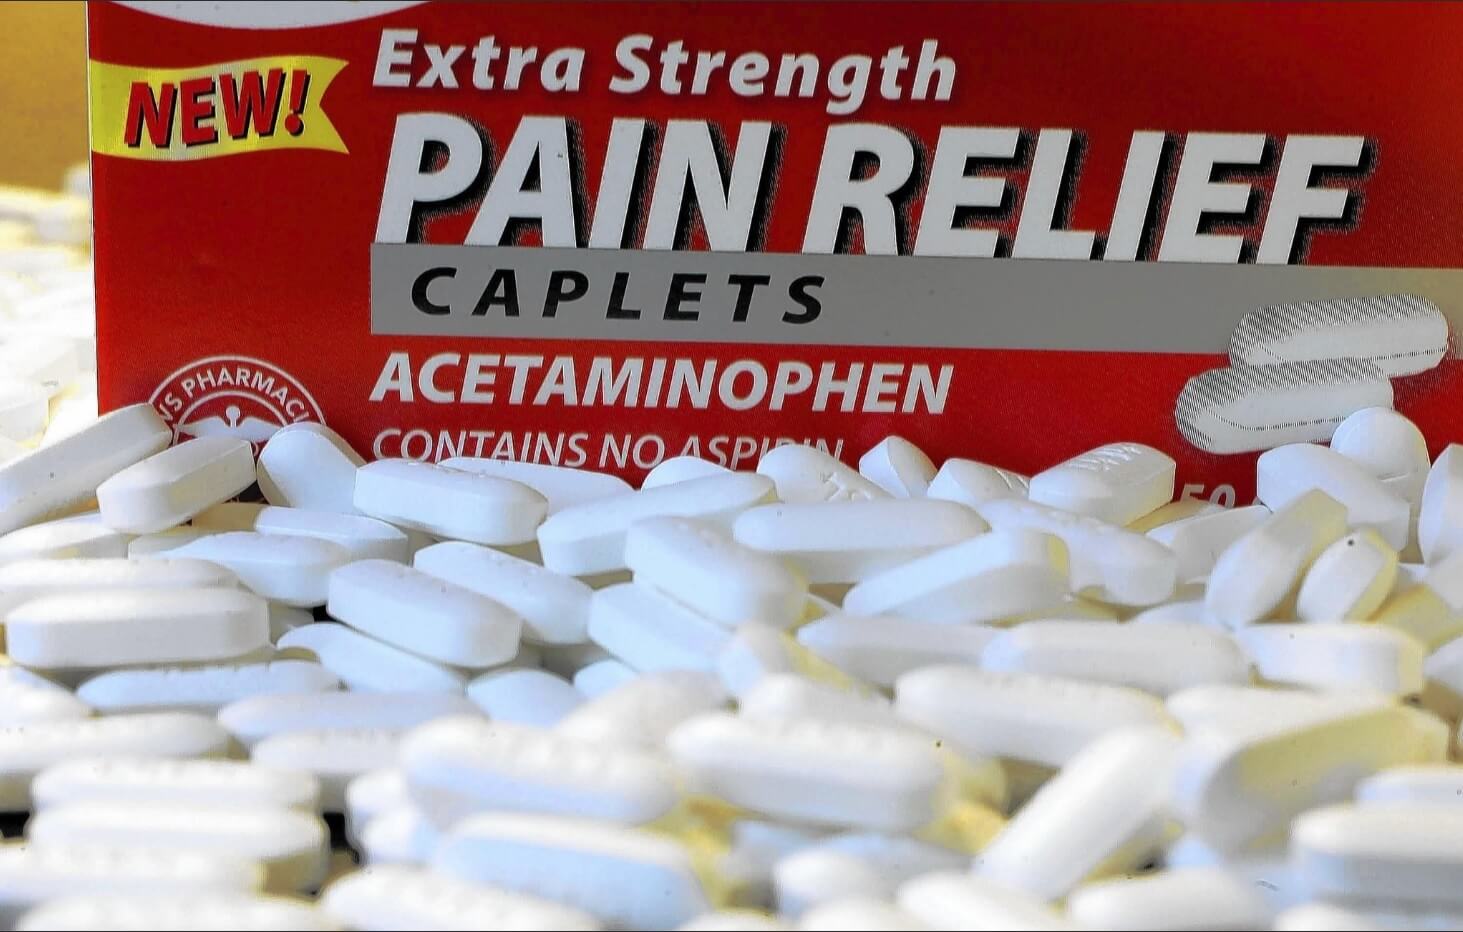 Which is the fastest painkiller?